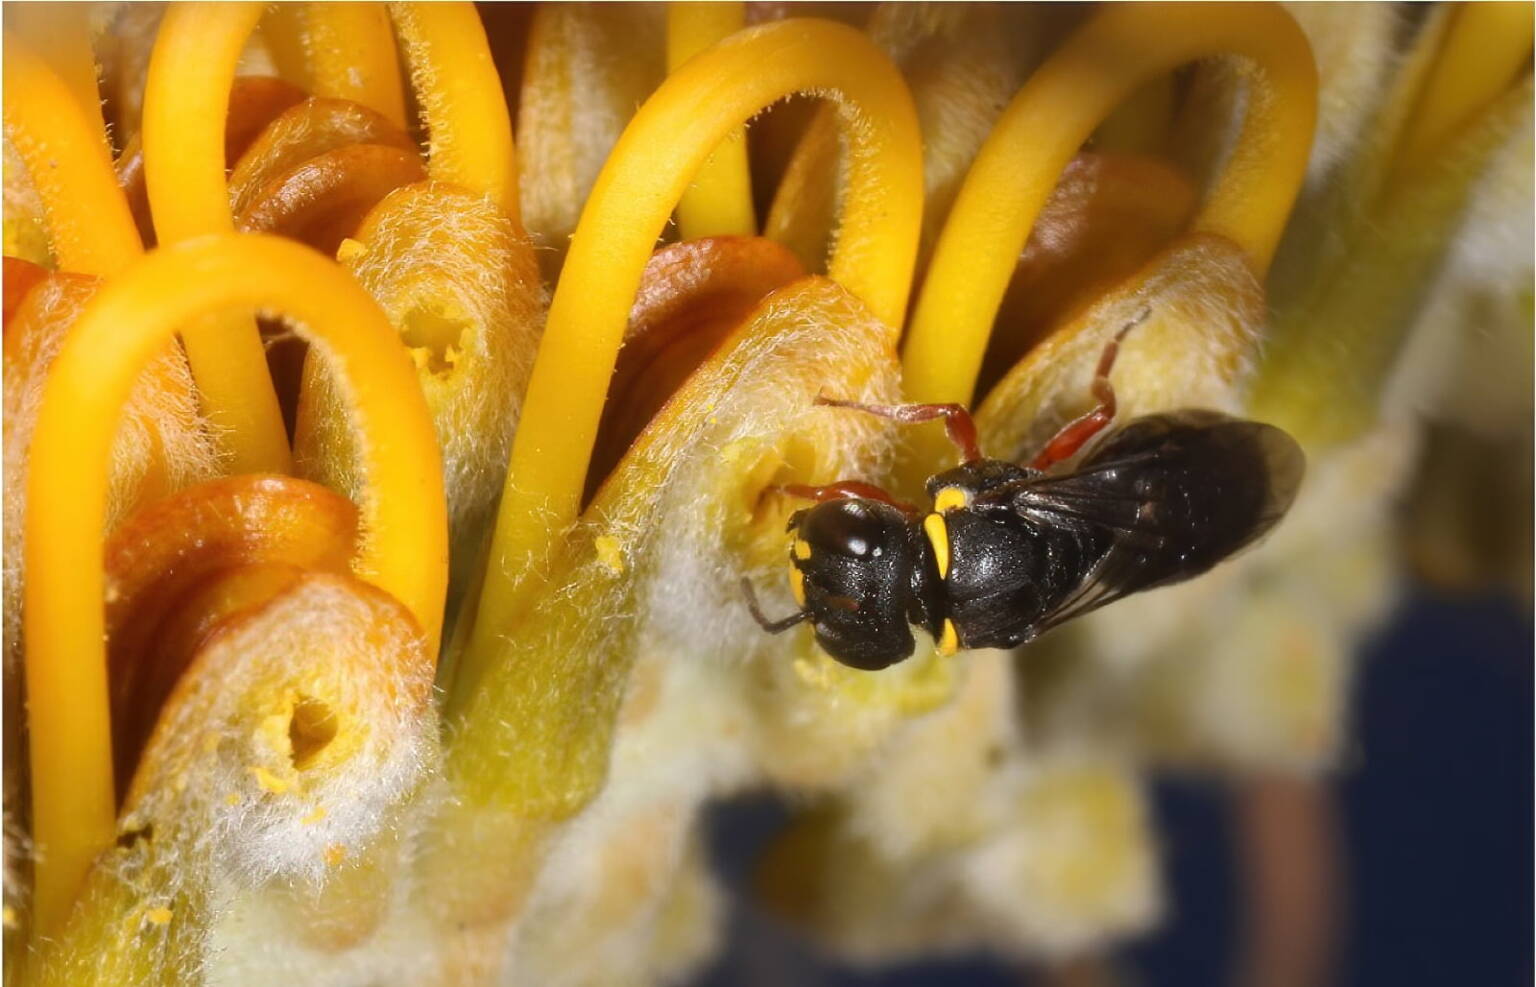 Female Hylaeus (Hylaeteron) douglasi extracting pollen from a hole cut into the perianth limb of a flower of Grevillea excelsior still closed. To the left more cut flowers are visible with some remaining crumbs of pollen © Marc Newman